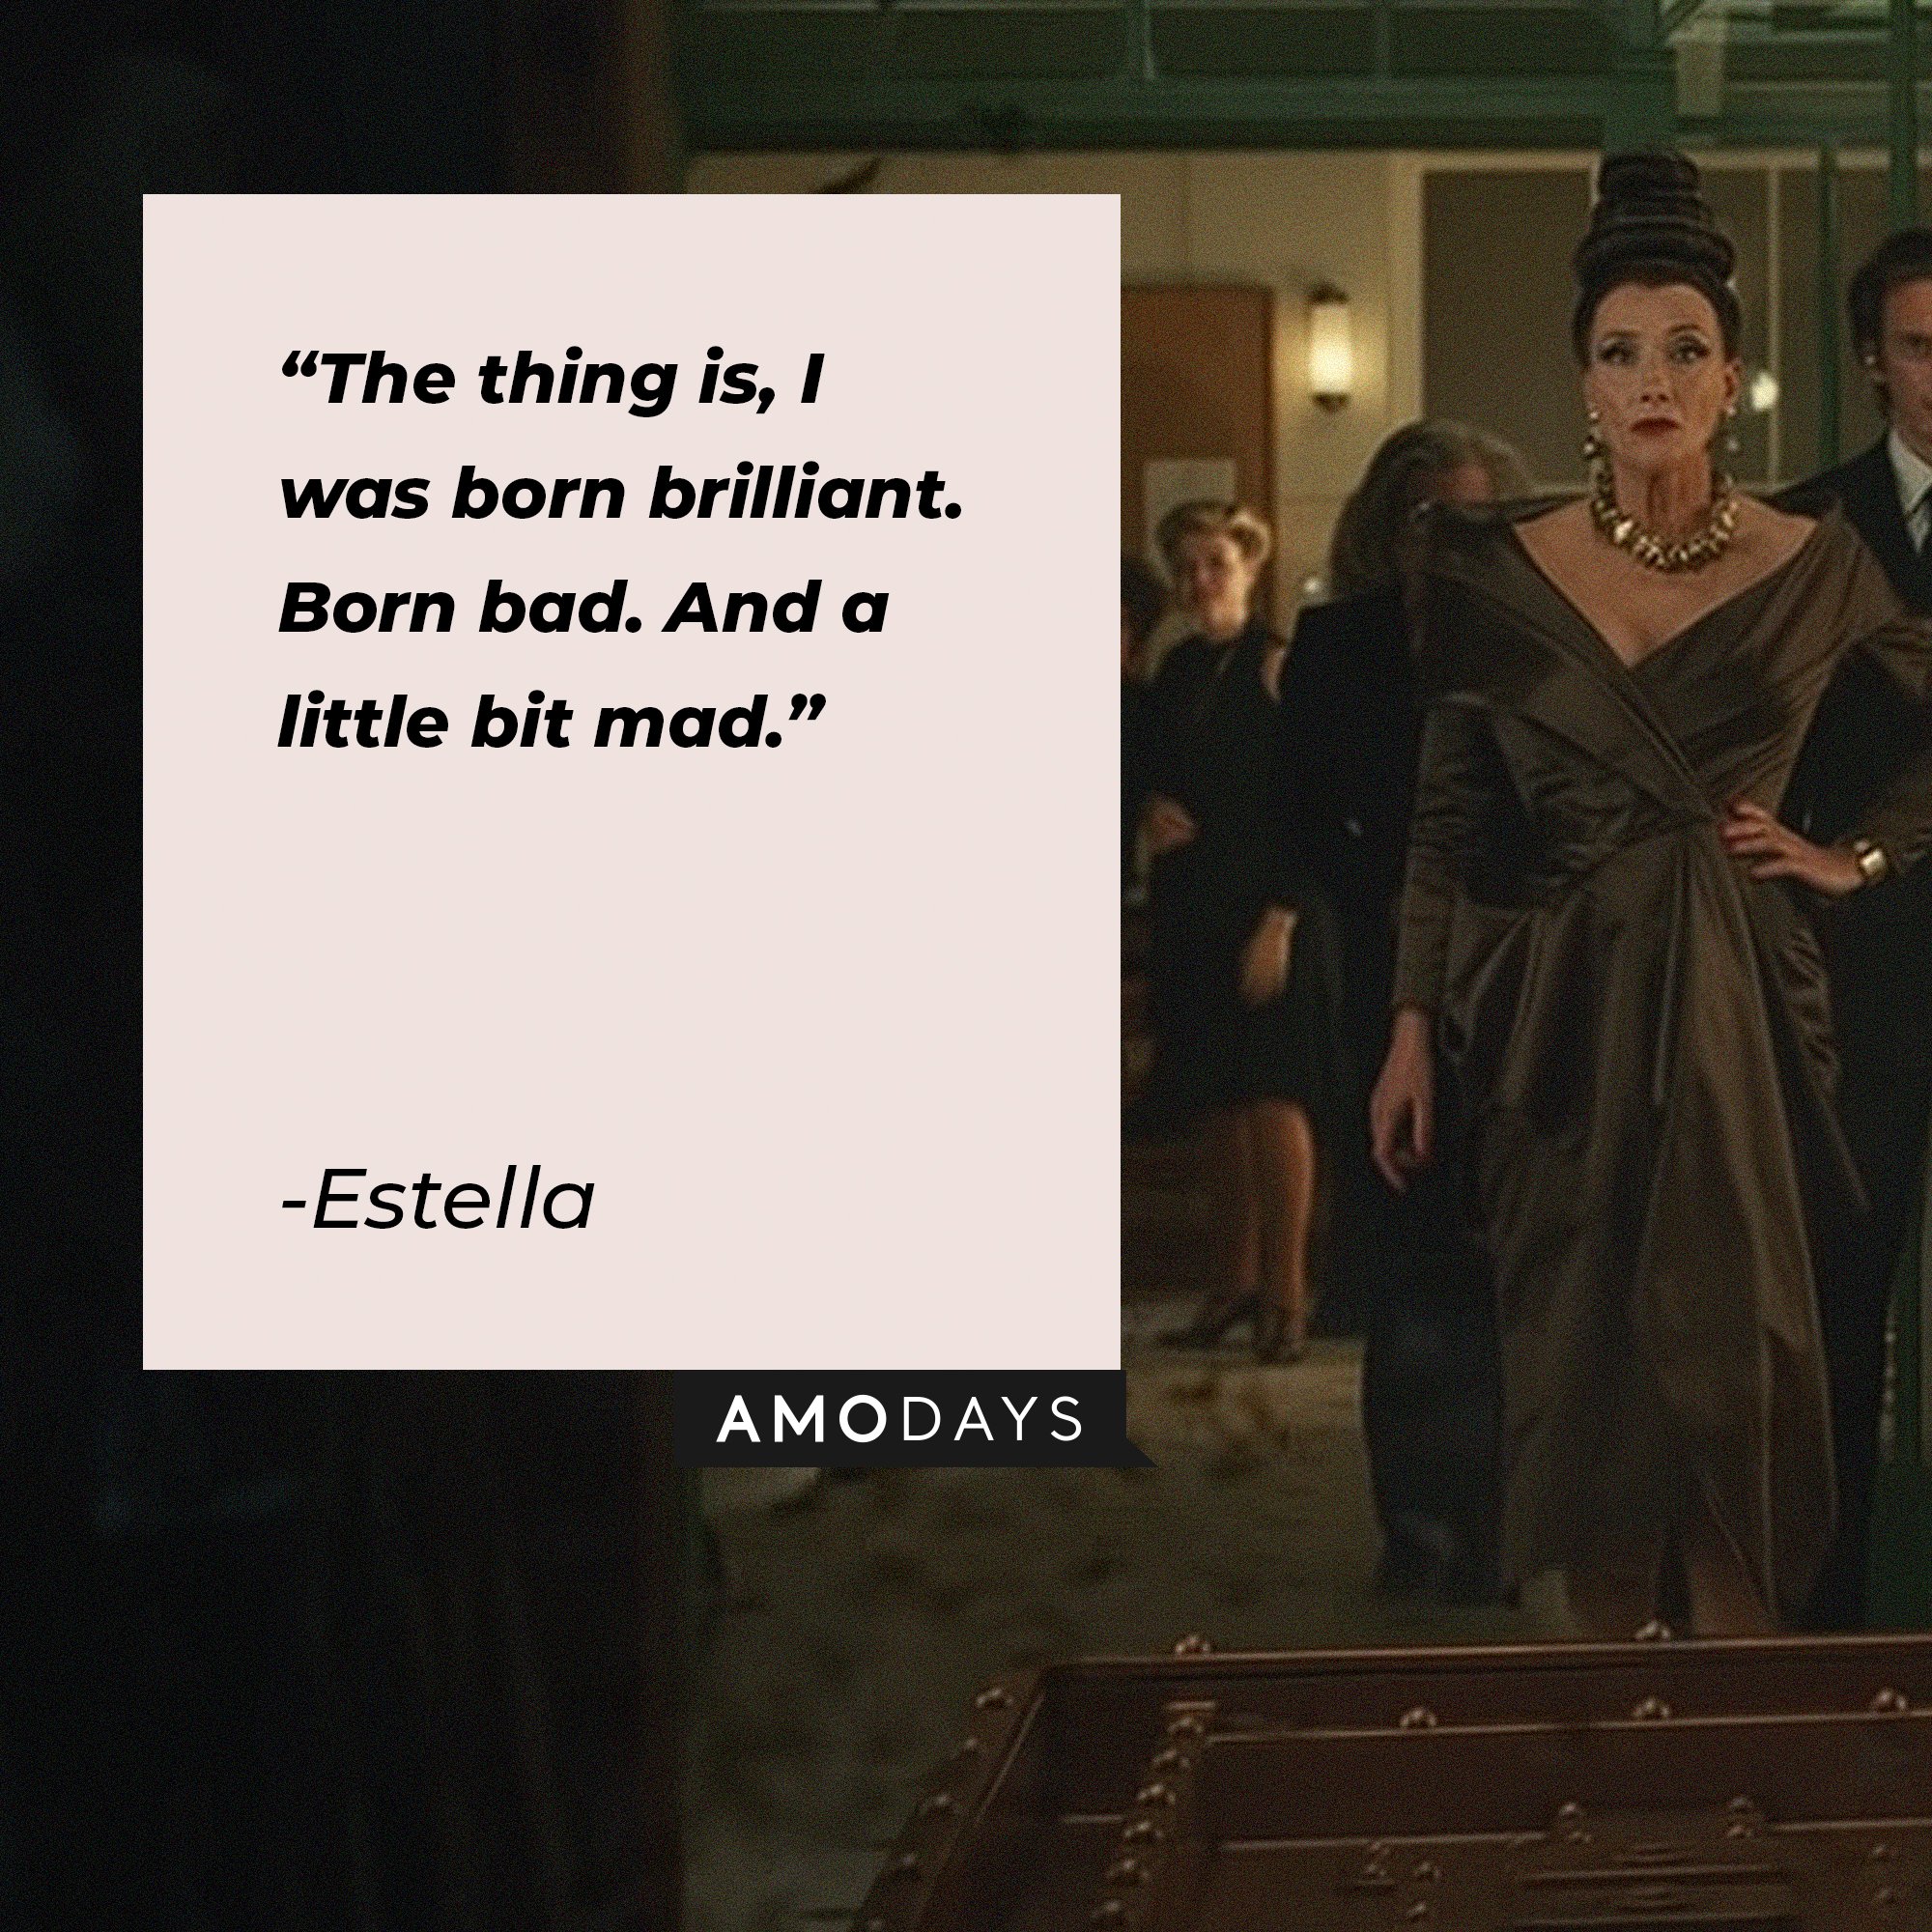 Estella’s quote: "The thing is, I was born brilliant. Born bad. And a little bit mad.” | Image: AmoDays